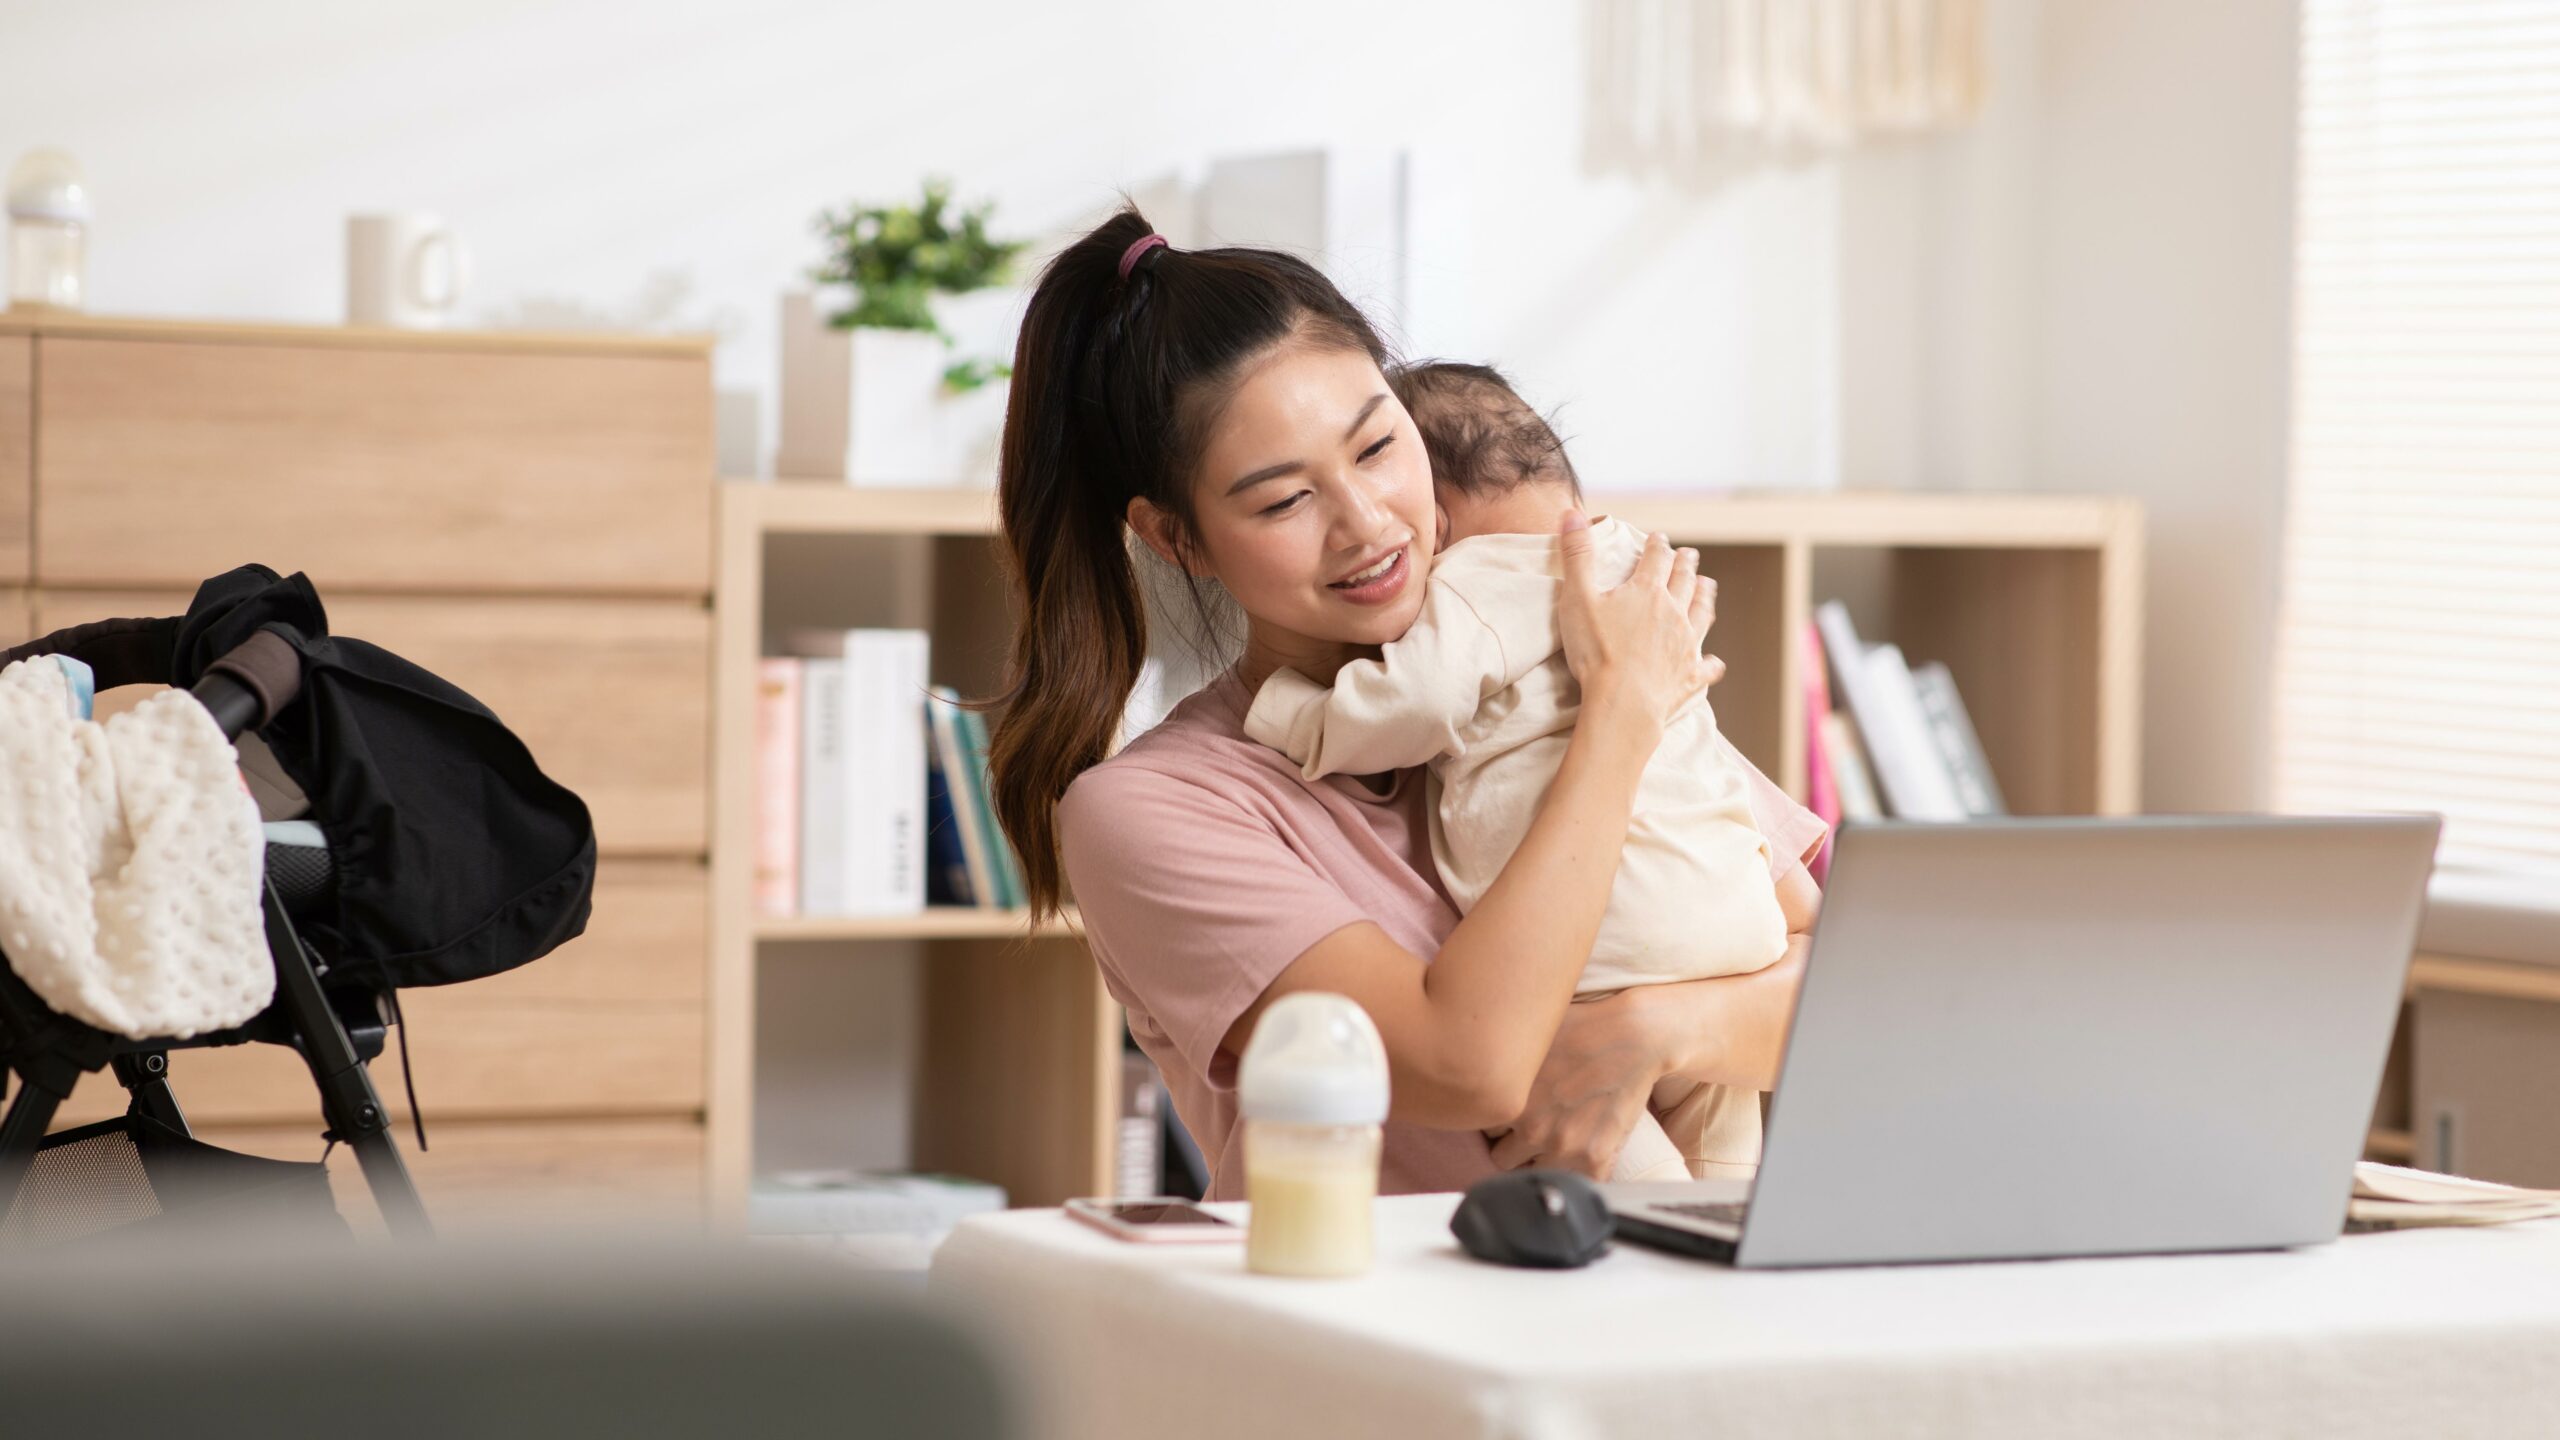 Mother Holding Baby While Working On Computer